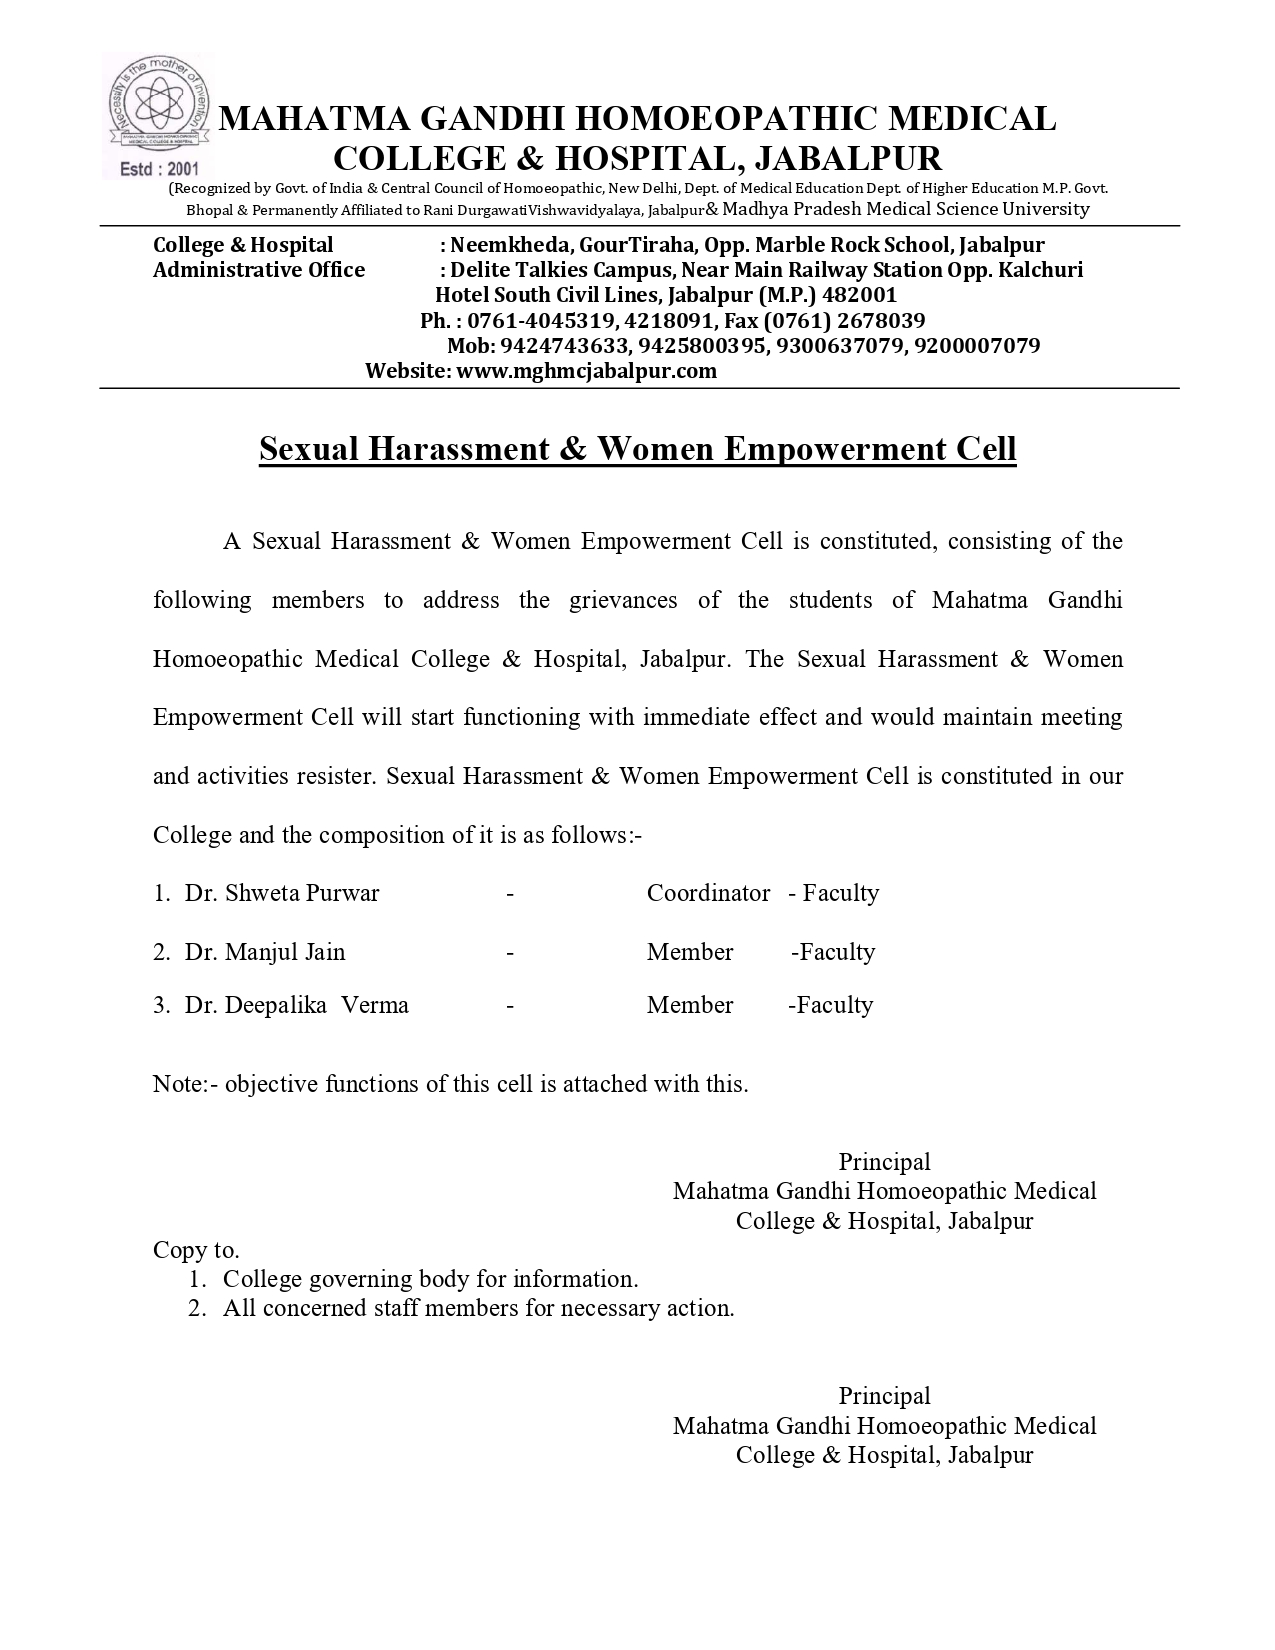 Mahatma Gandhi Homoeopathic Medical College & Hospital Sexual Harassment & Women Empowerment Cell